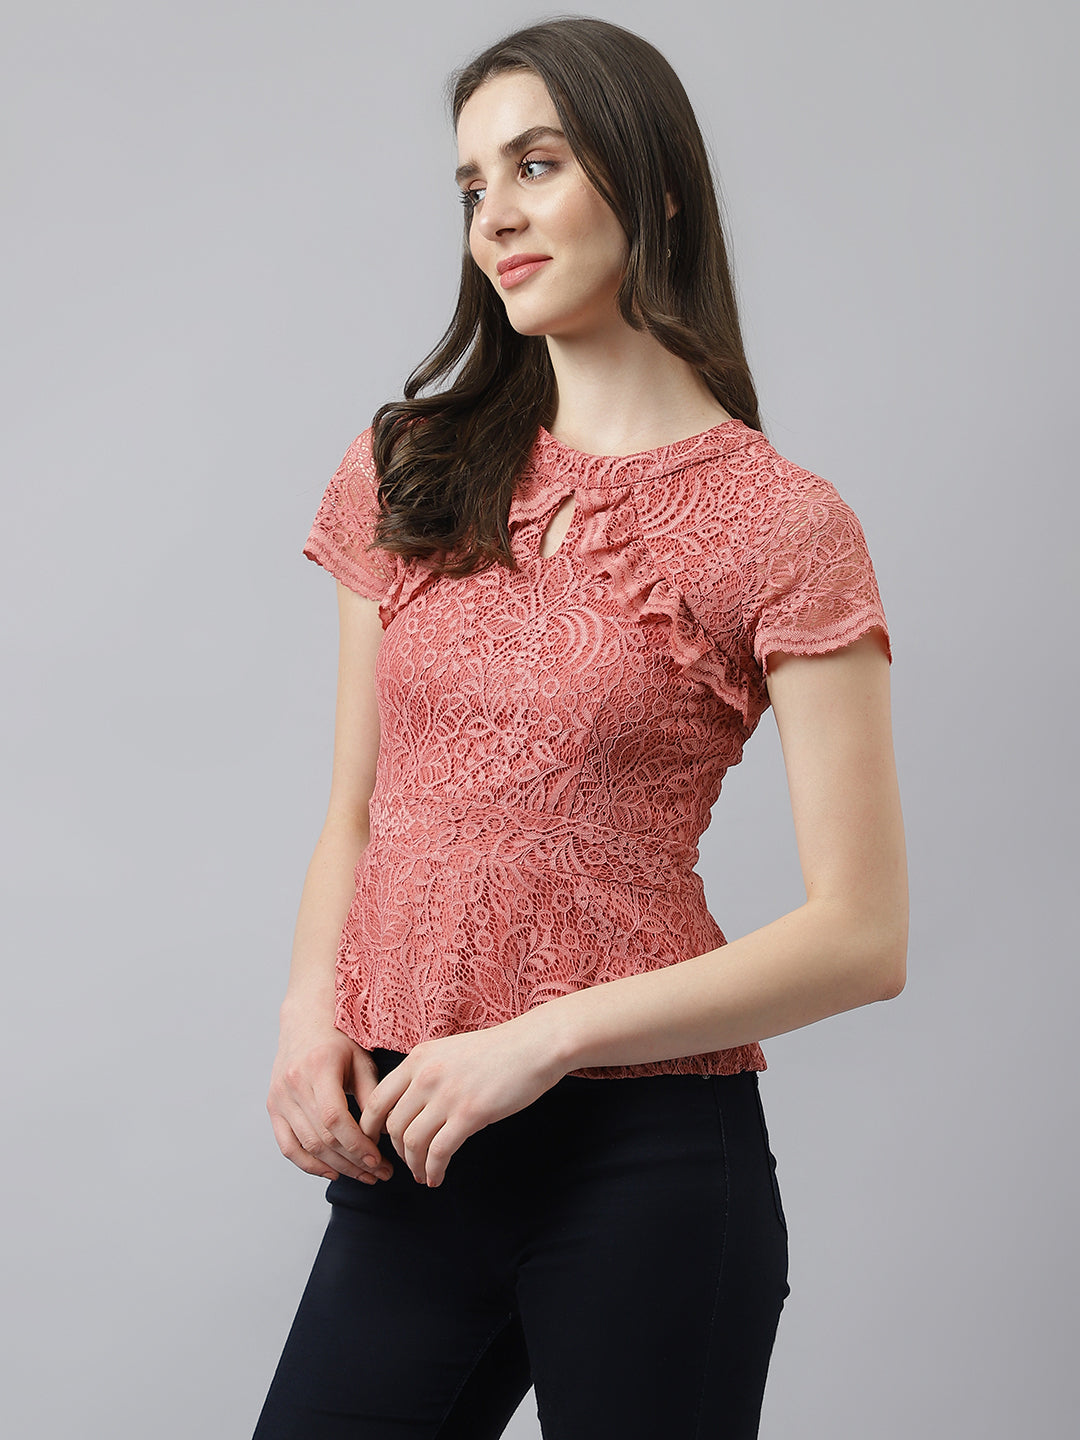 Rose Self Design Lace Top With Cap Sleeves & Ruffles